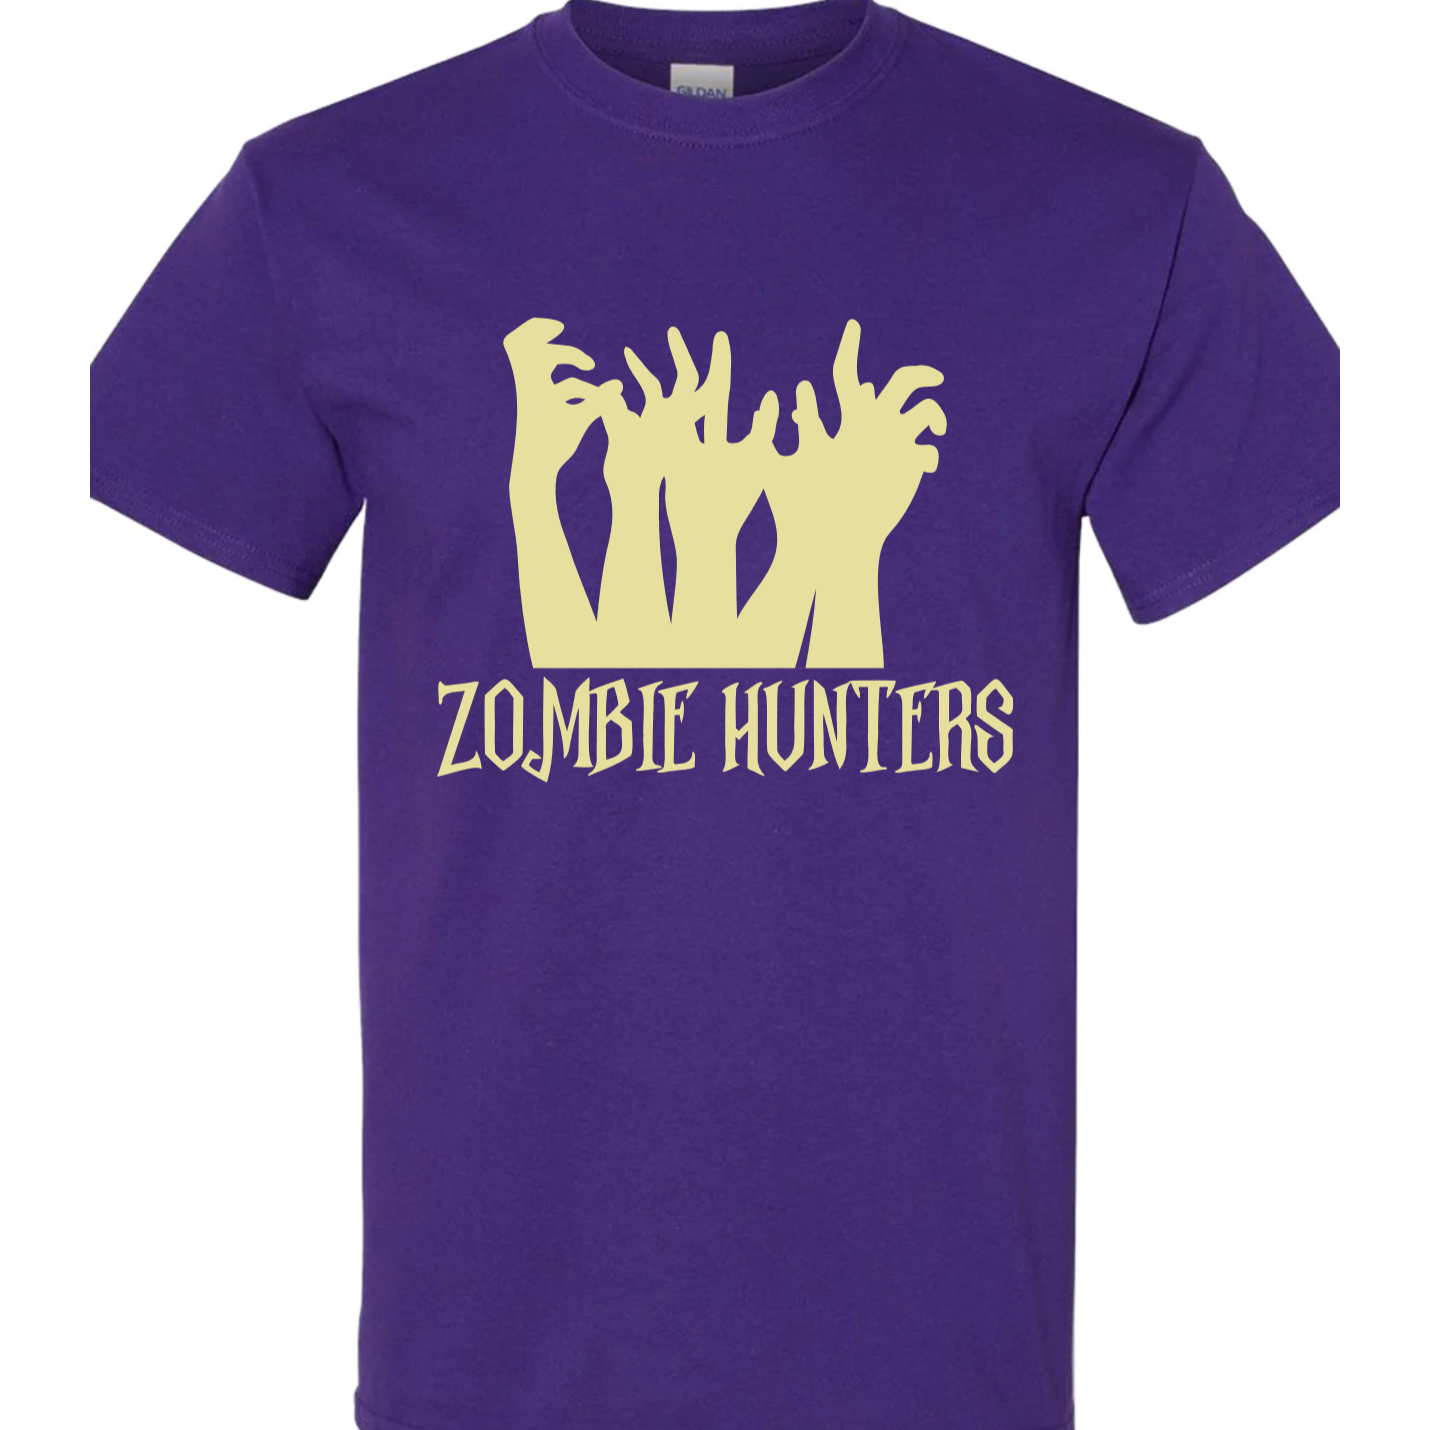 Zombie Hunters Vinyl Graphic for Shirts